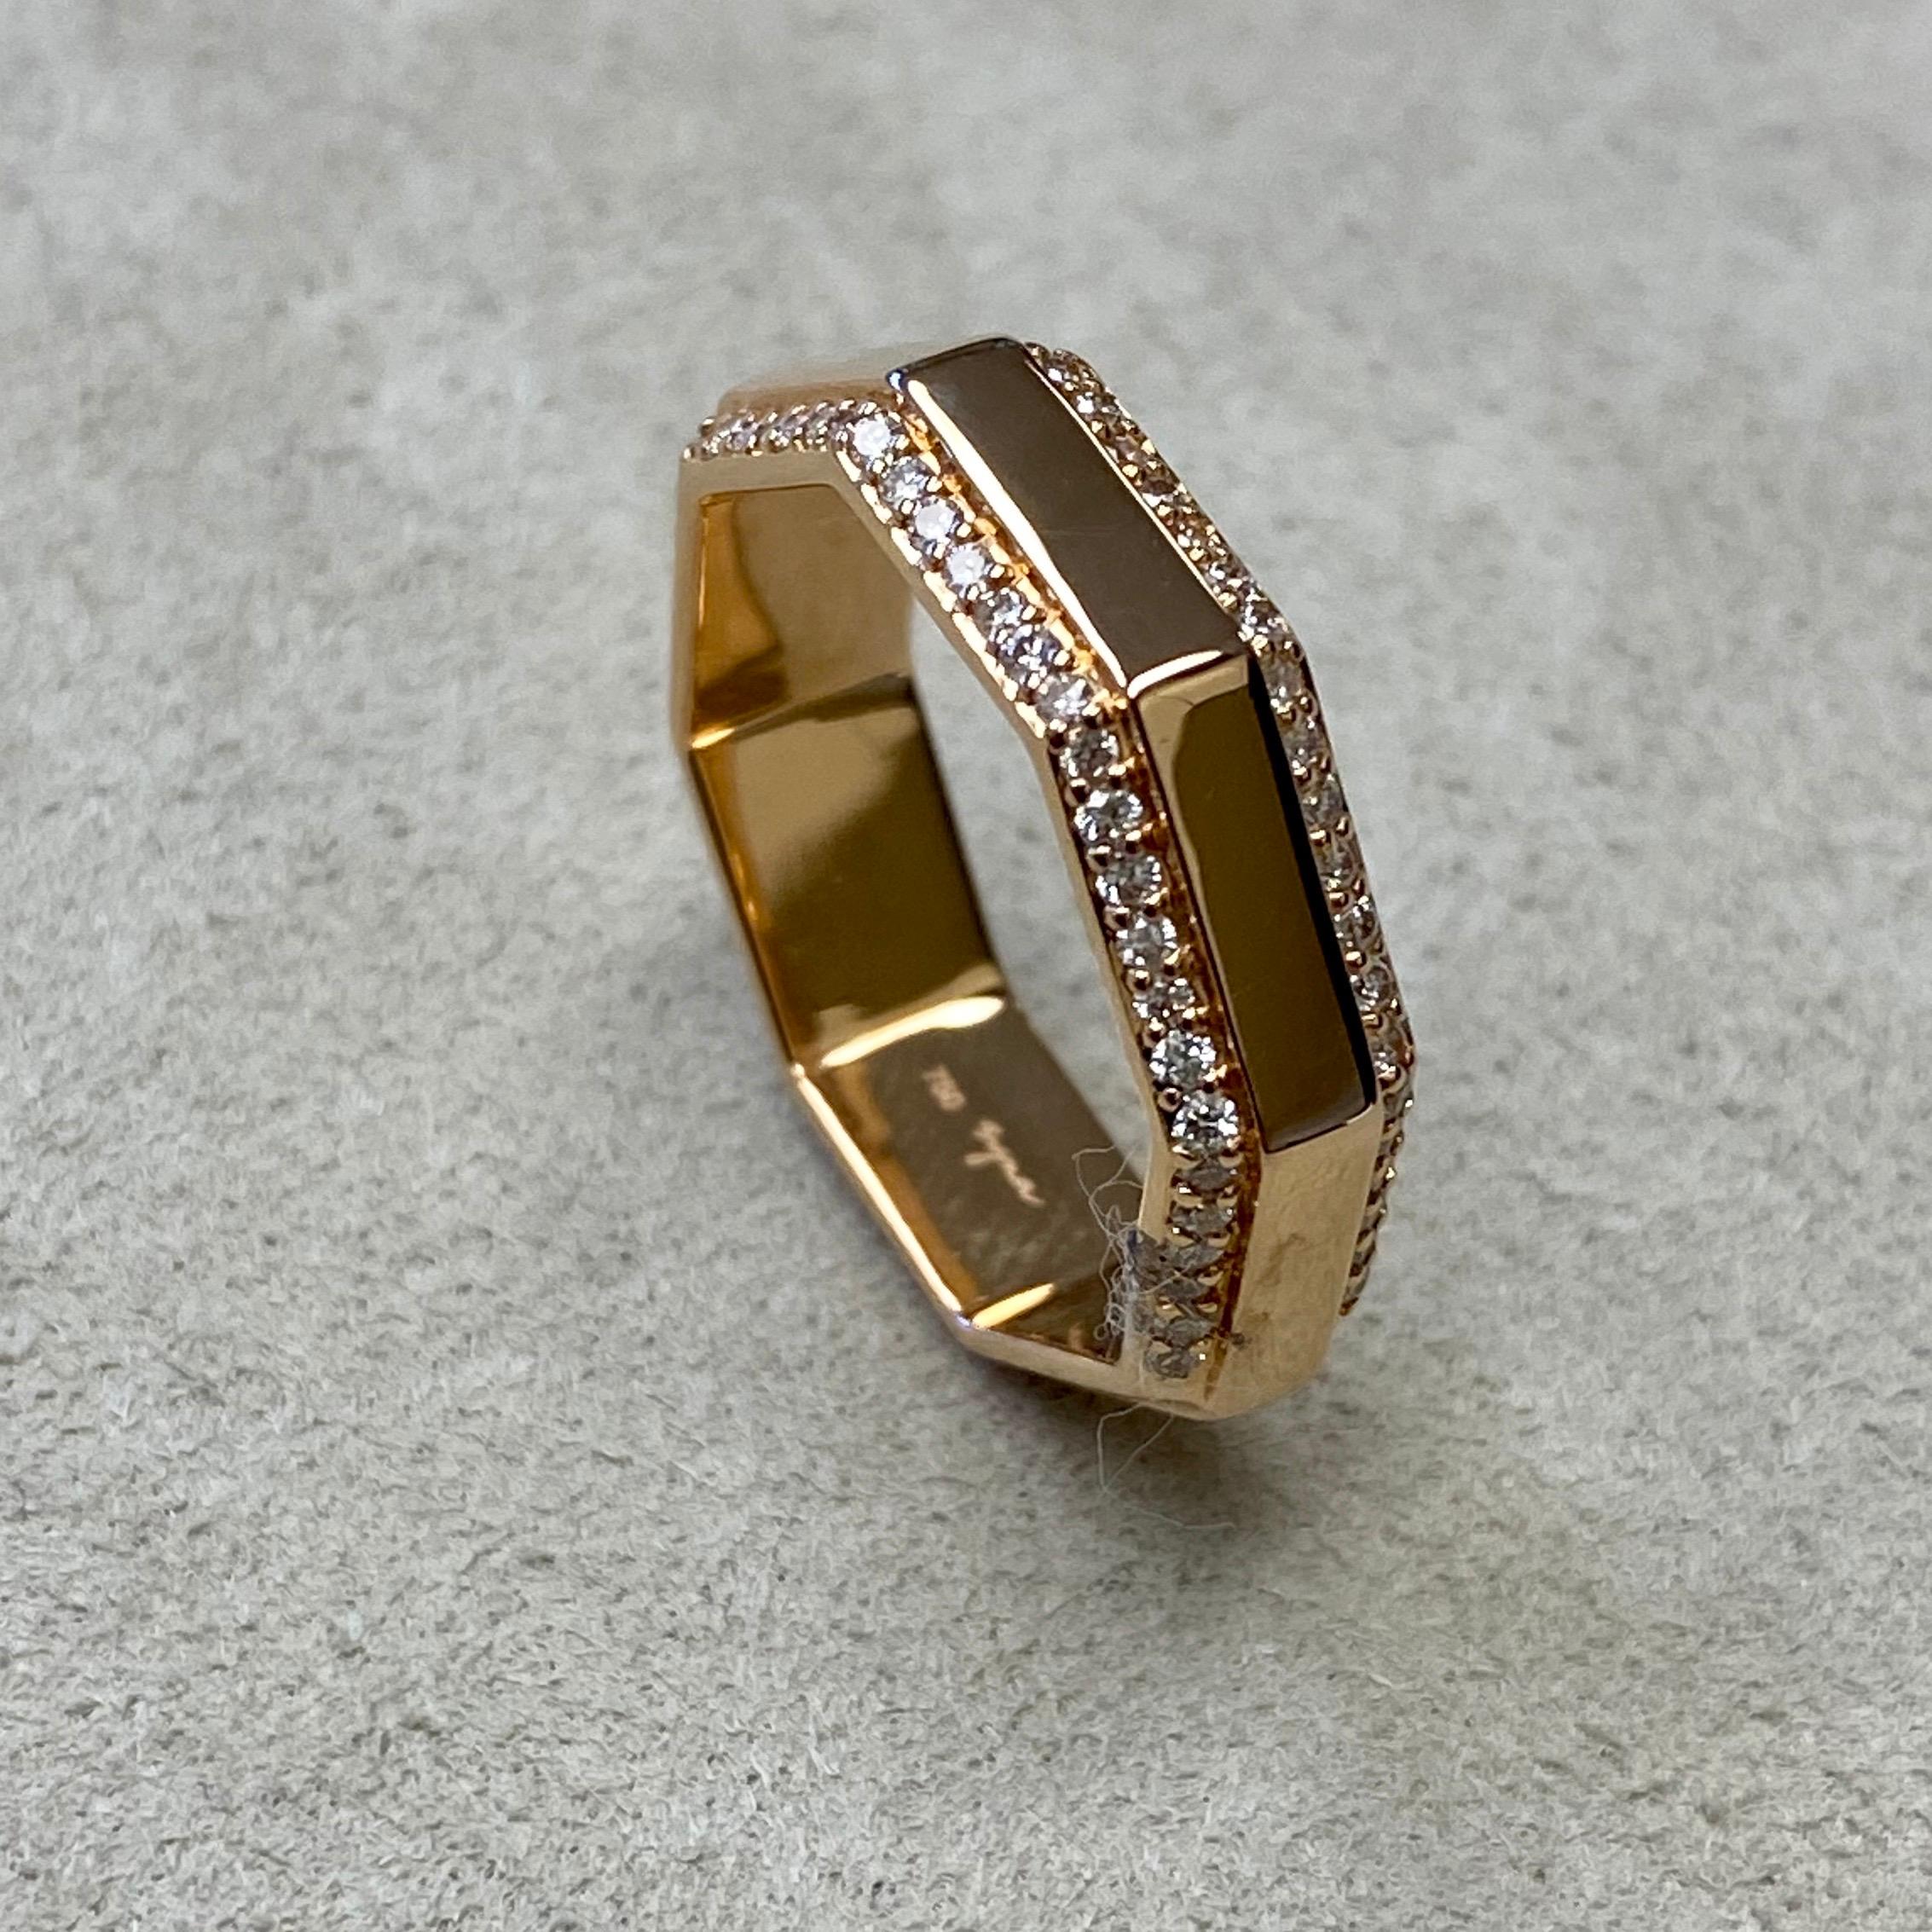 Created in 18 karat rose gold
Diamonds 0.45 ct approx
Ring size US 6.5, Can be made in other ring sizes on special order

This luxurious ring, crafted from 18-karat rose gold, showcases an array of dazzling diamonds totaling an approximate 0.45